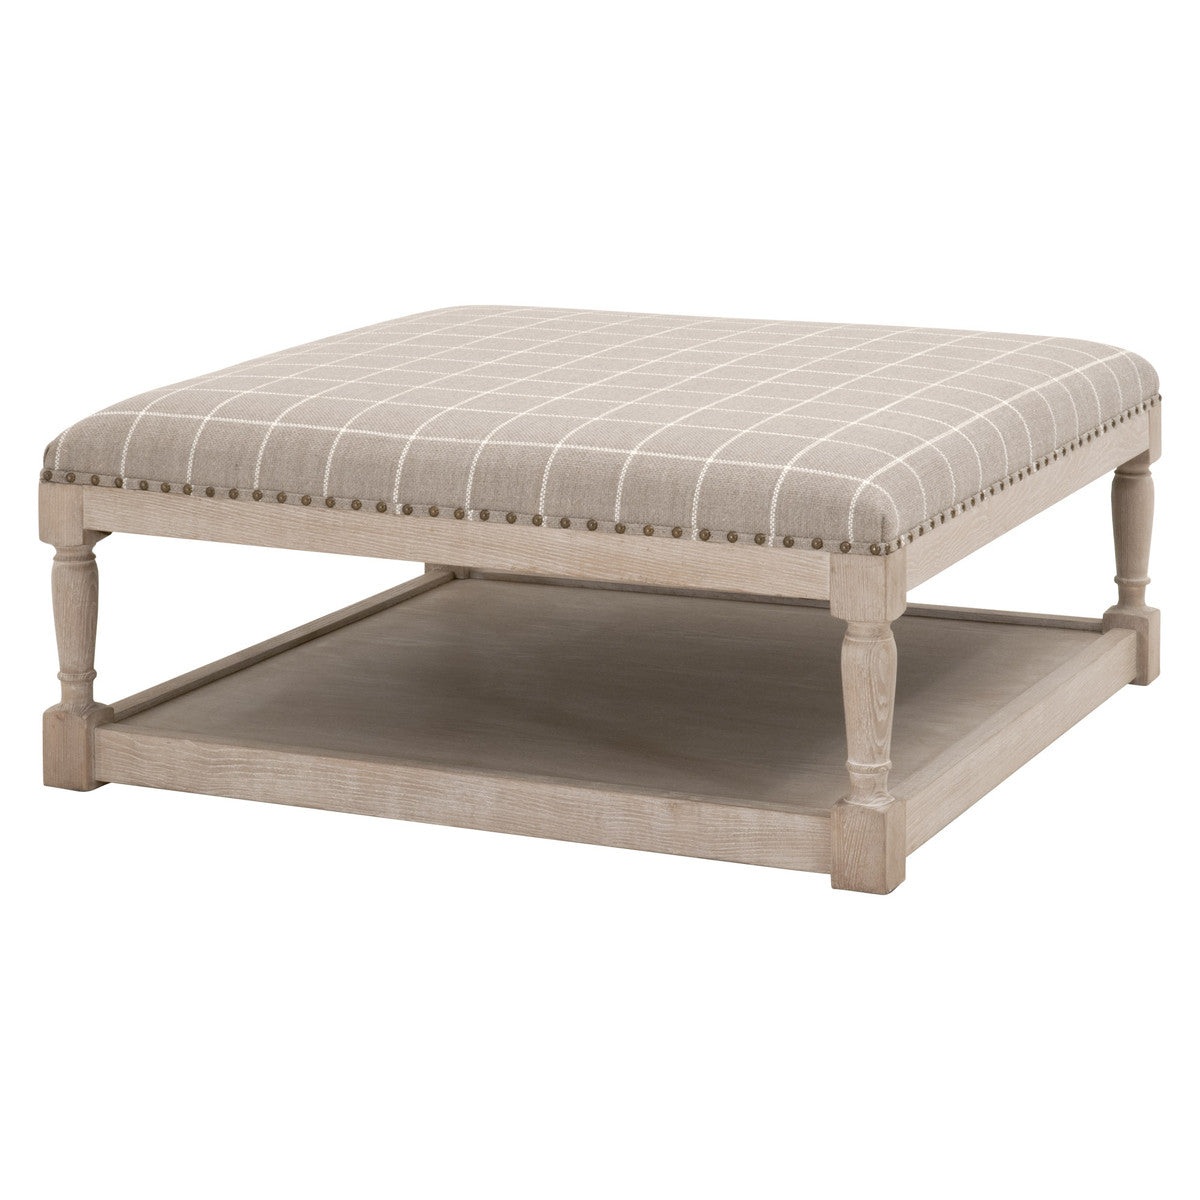 TOWNSEND UPHOLSTERED COFFEE TABLE - WINDOWPANE PEBBLE